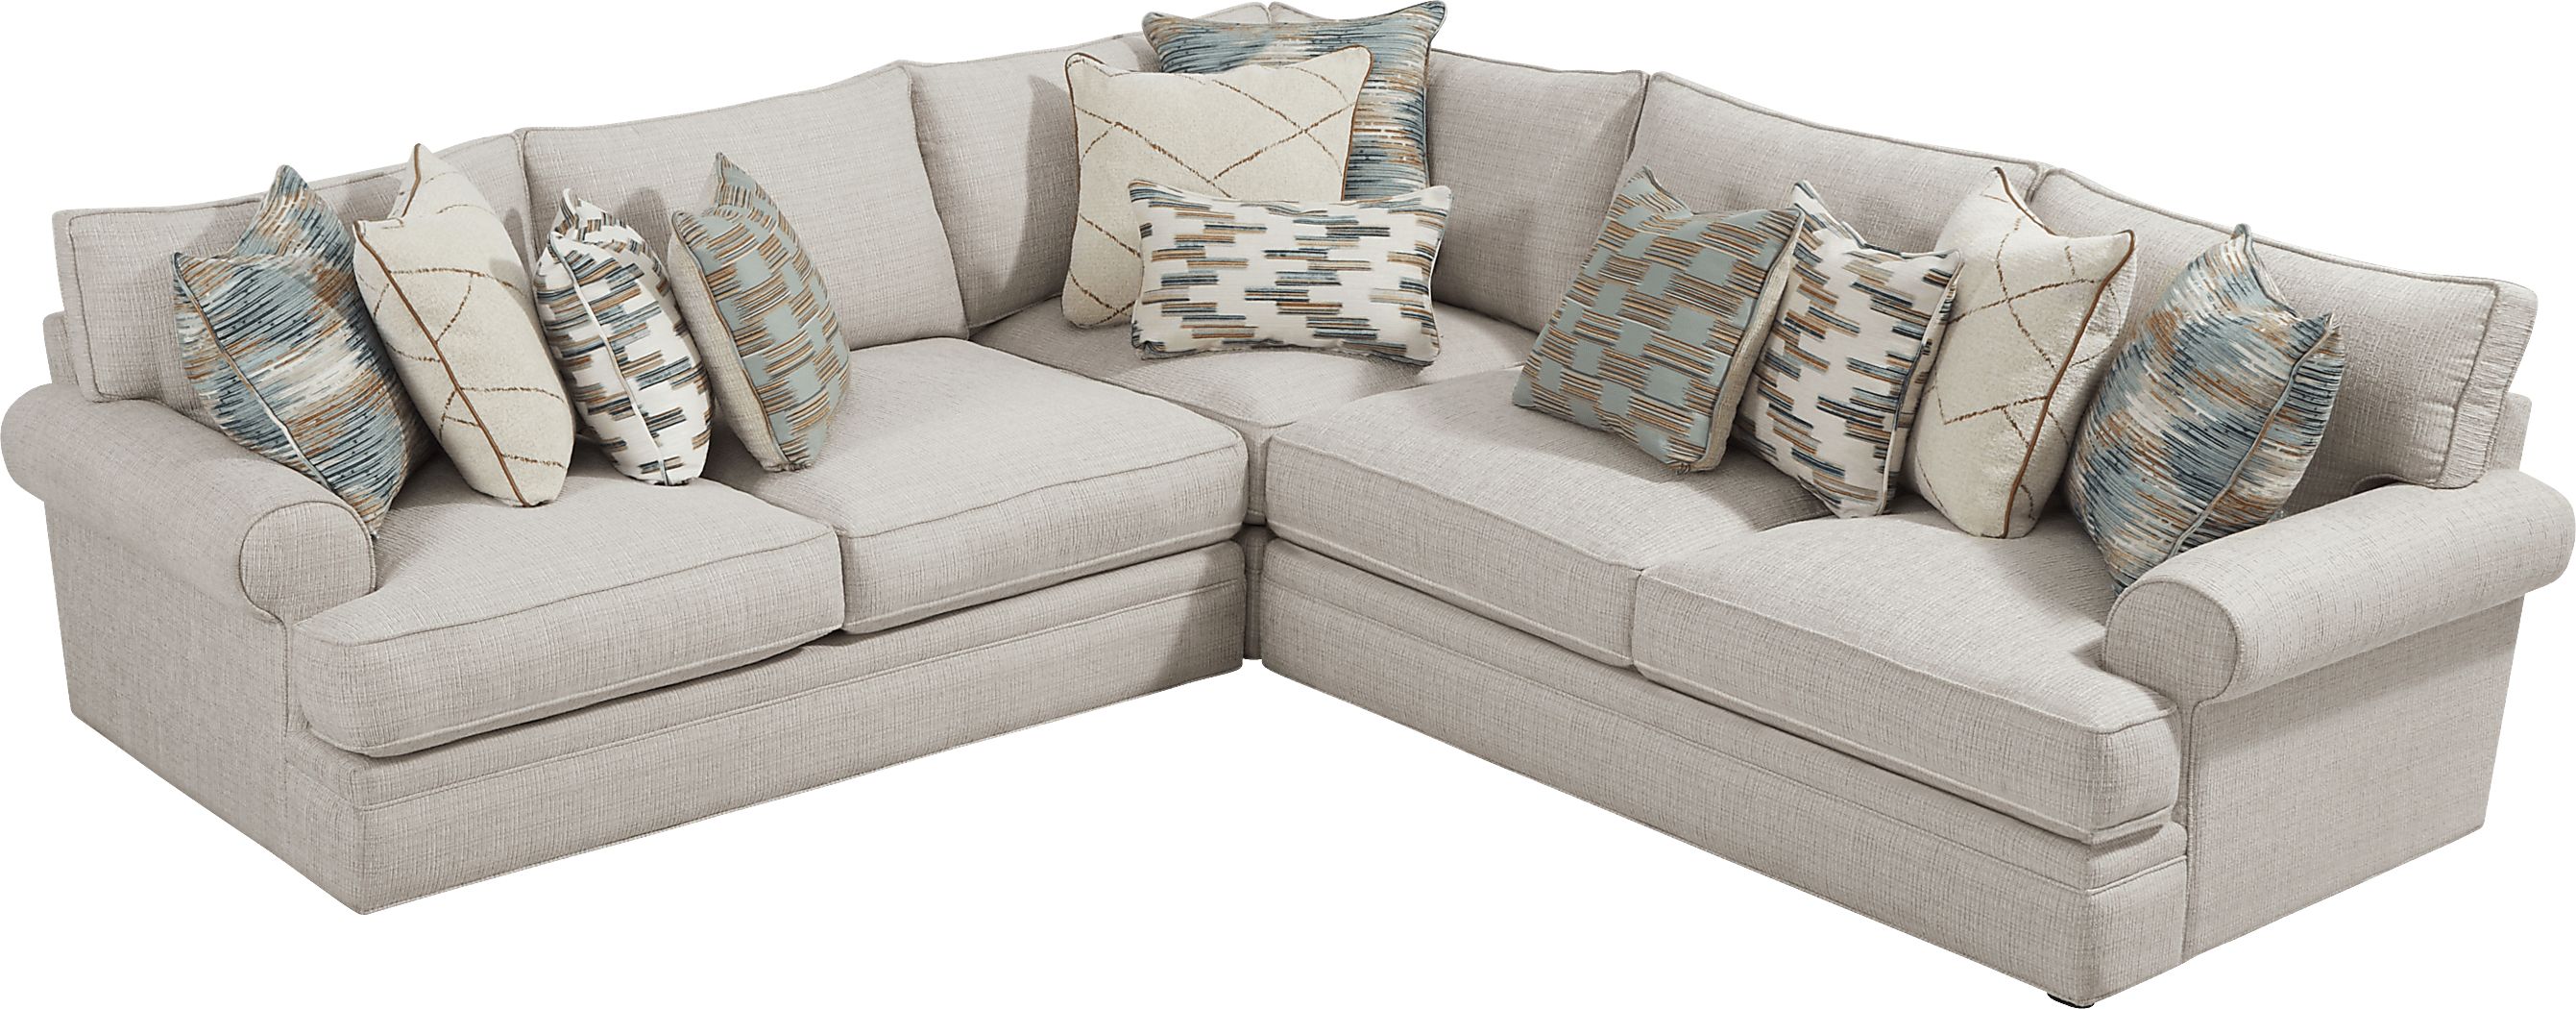 Cindy Crawford Home Brookview Heights Beige 6 Pc Sectional Living Room